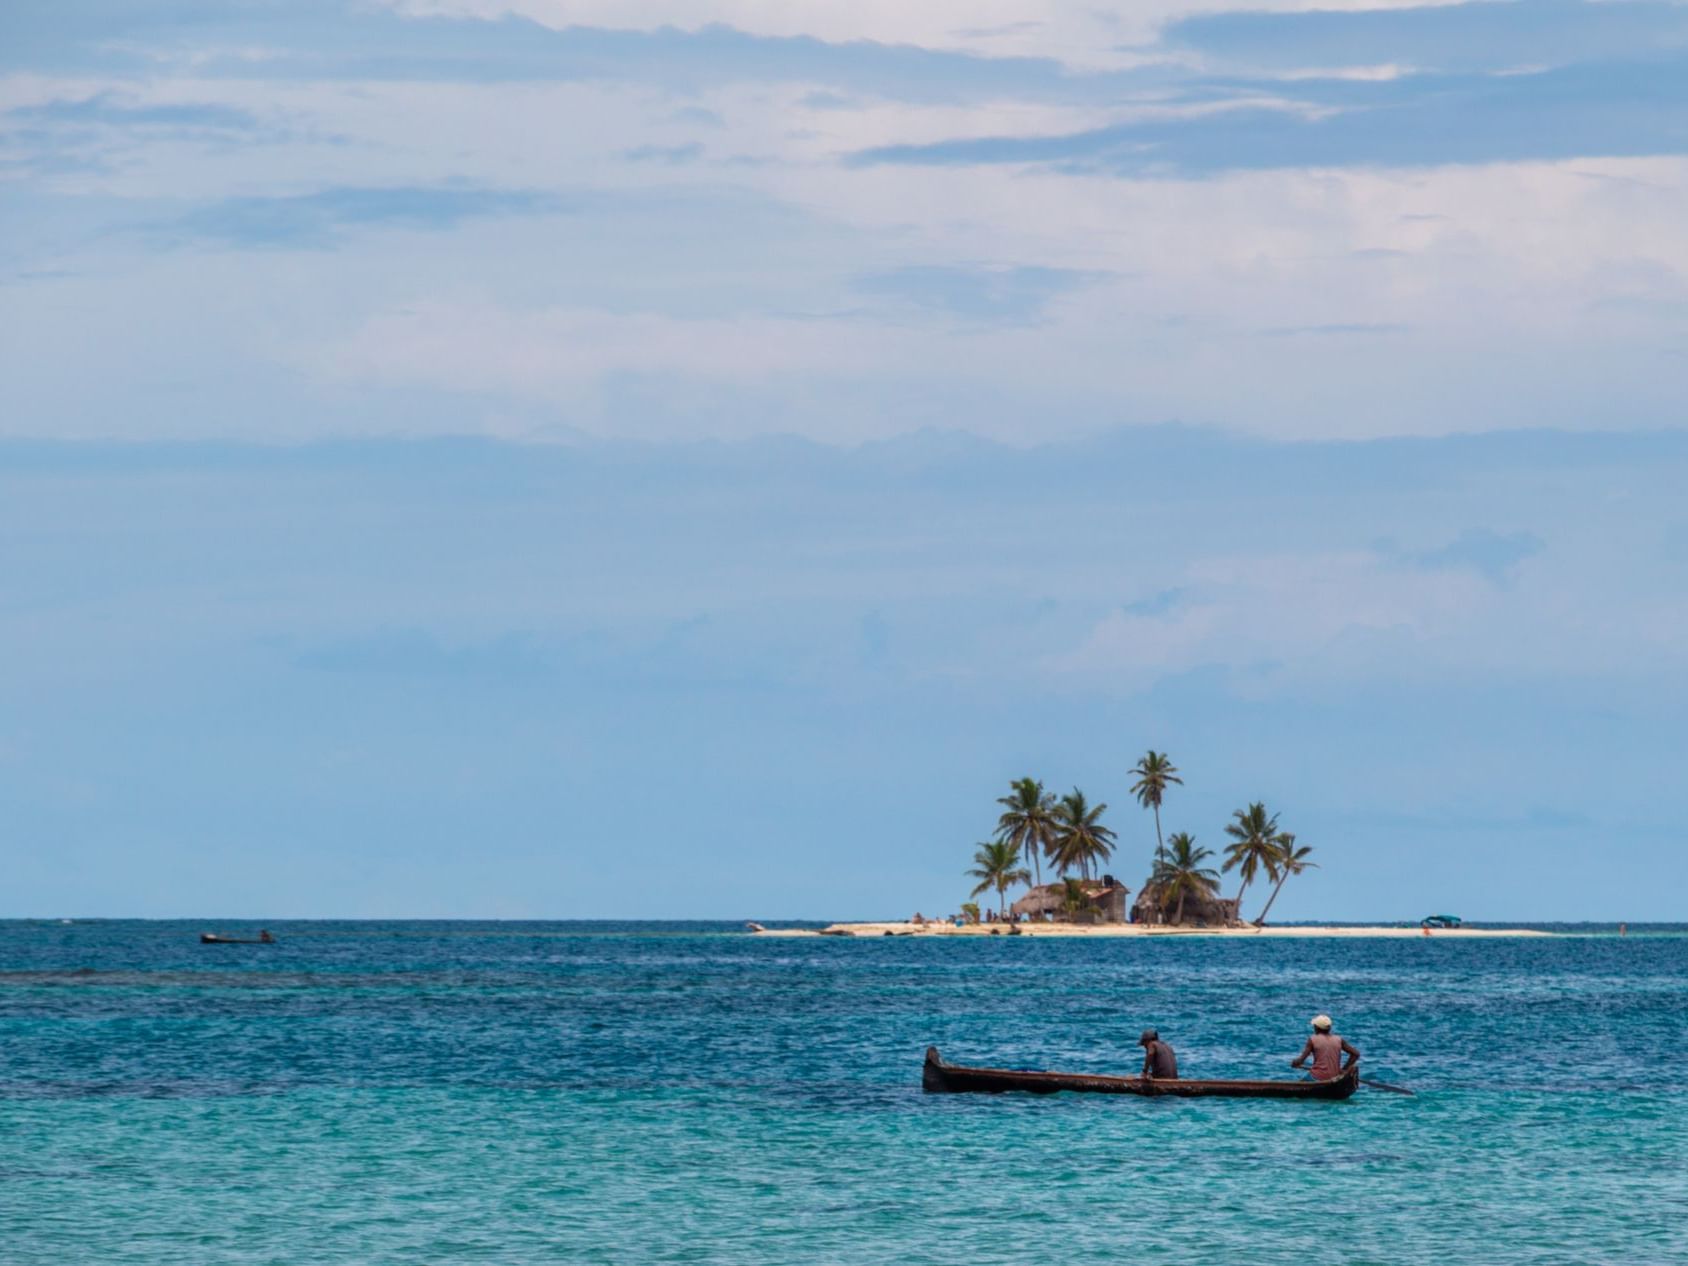 A fisherman boat in the sea and San Blas Island at the back